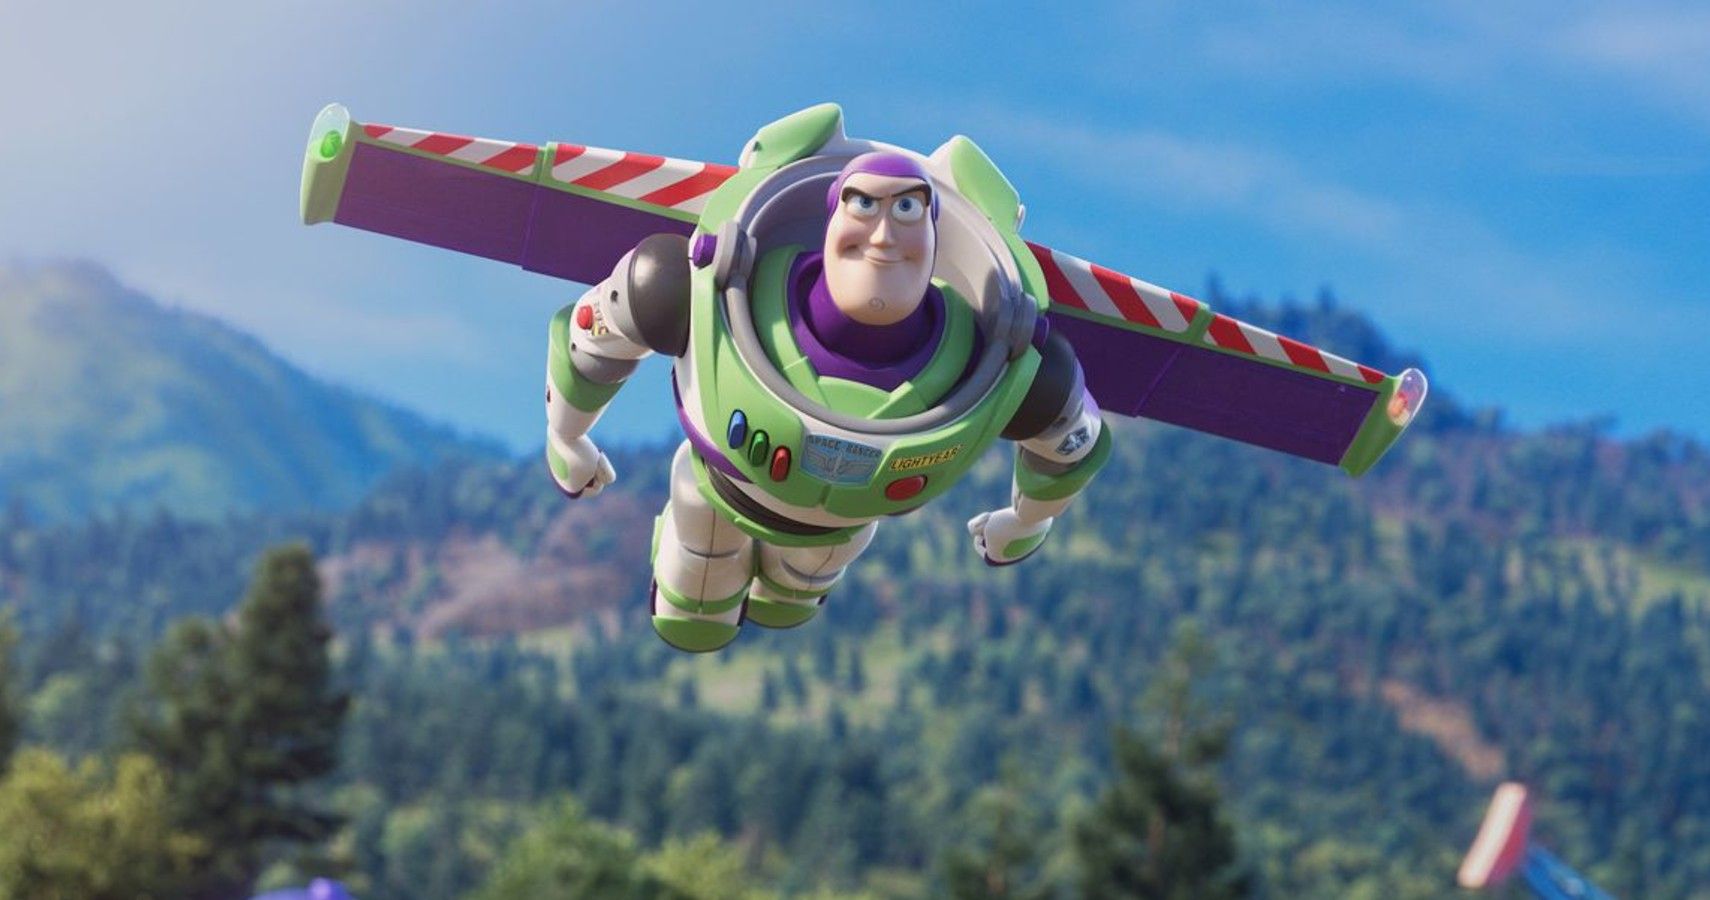 Buzz Lightyear flying through the air with a mountain backdrop.